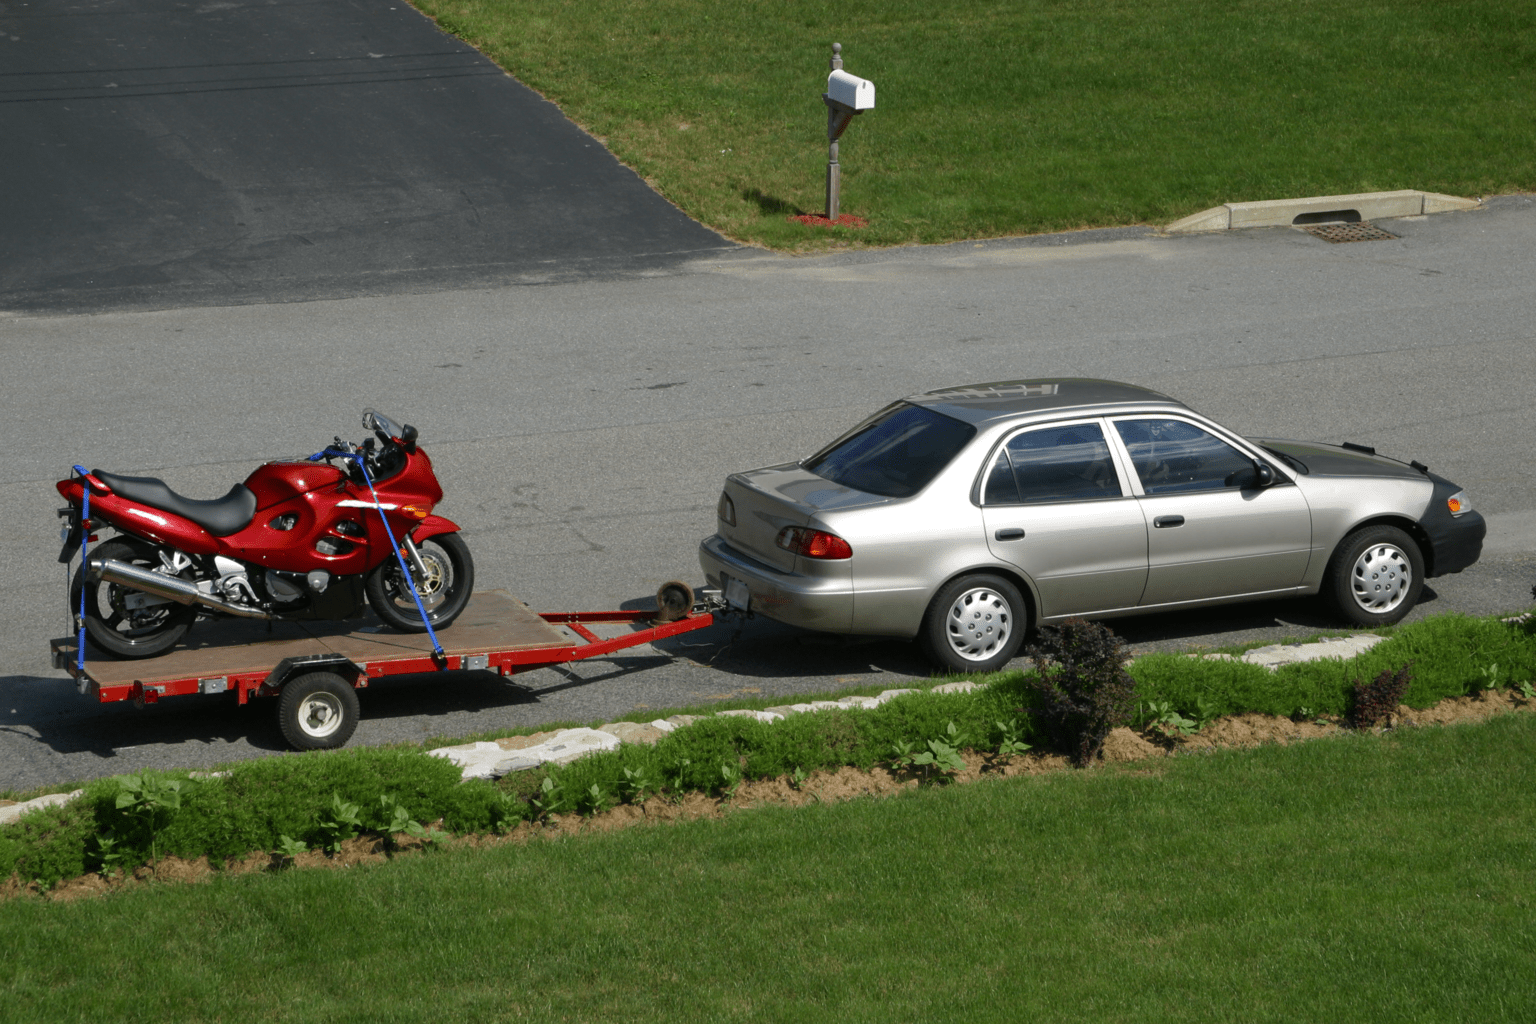 this image shows motorcycle towing in Charlotte, NC